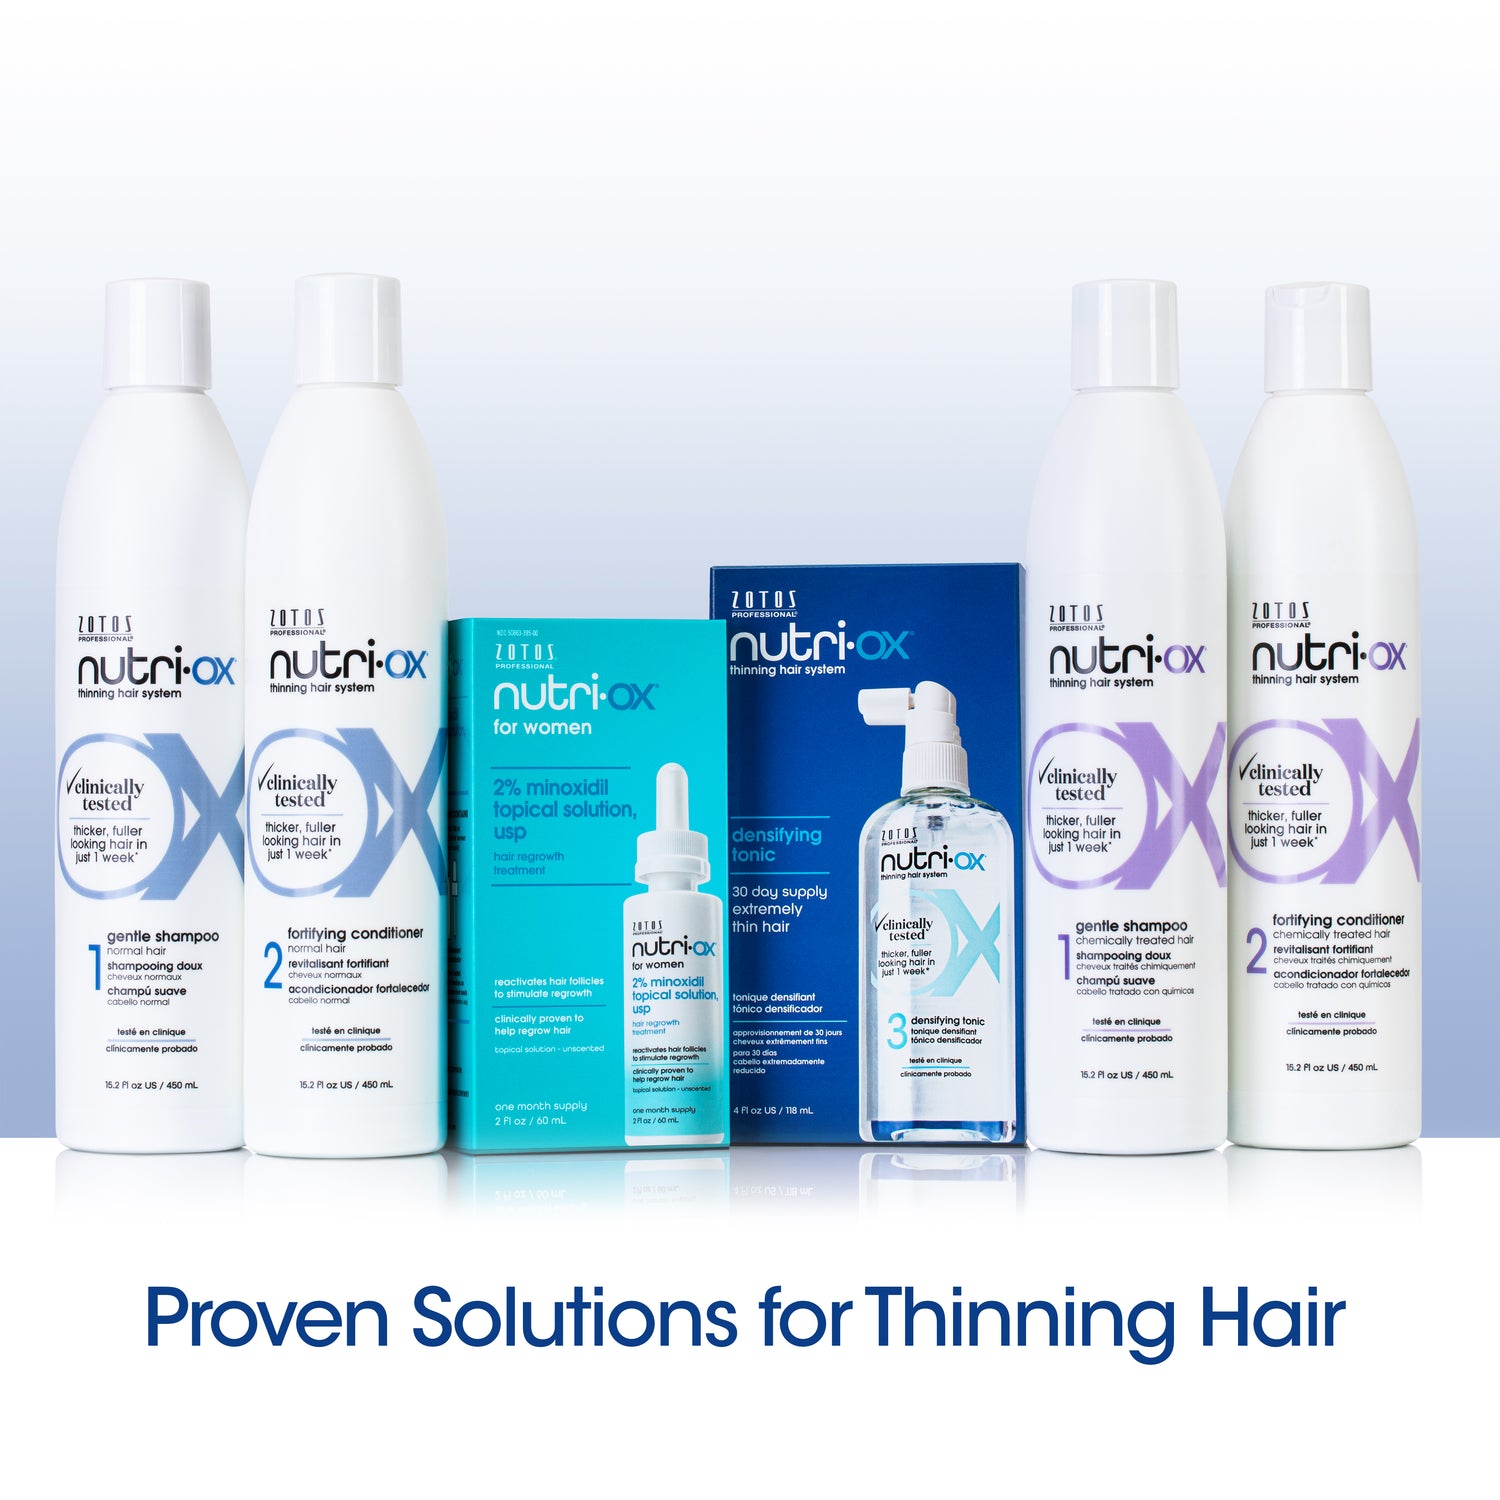 Nutri-ox Proven Solutions for Thinning Hair. 